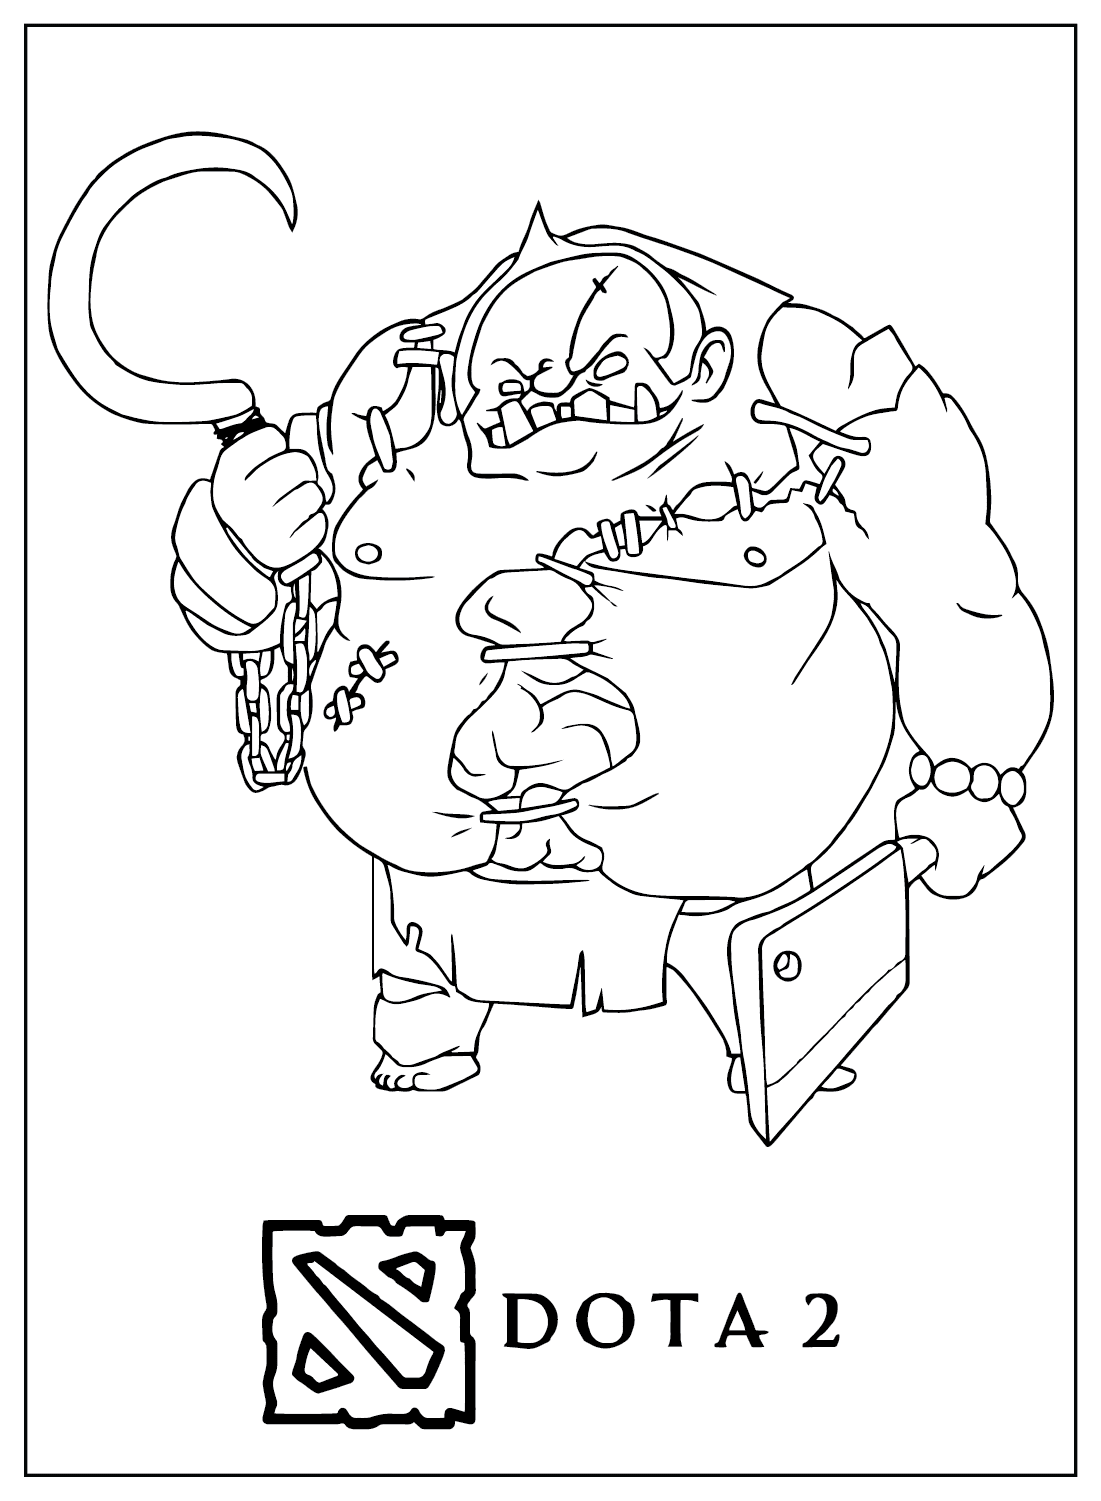 Pudge the Butcher Coloring Page from Dota 2